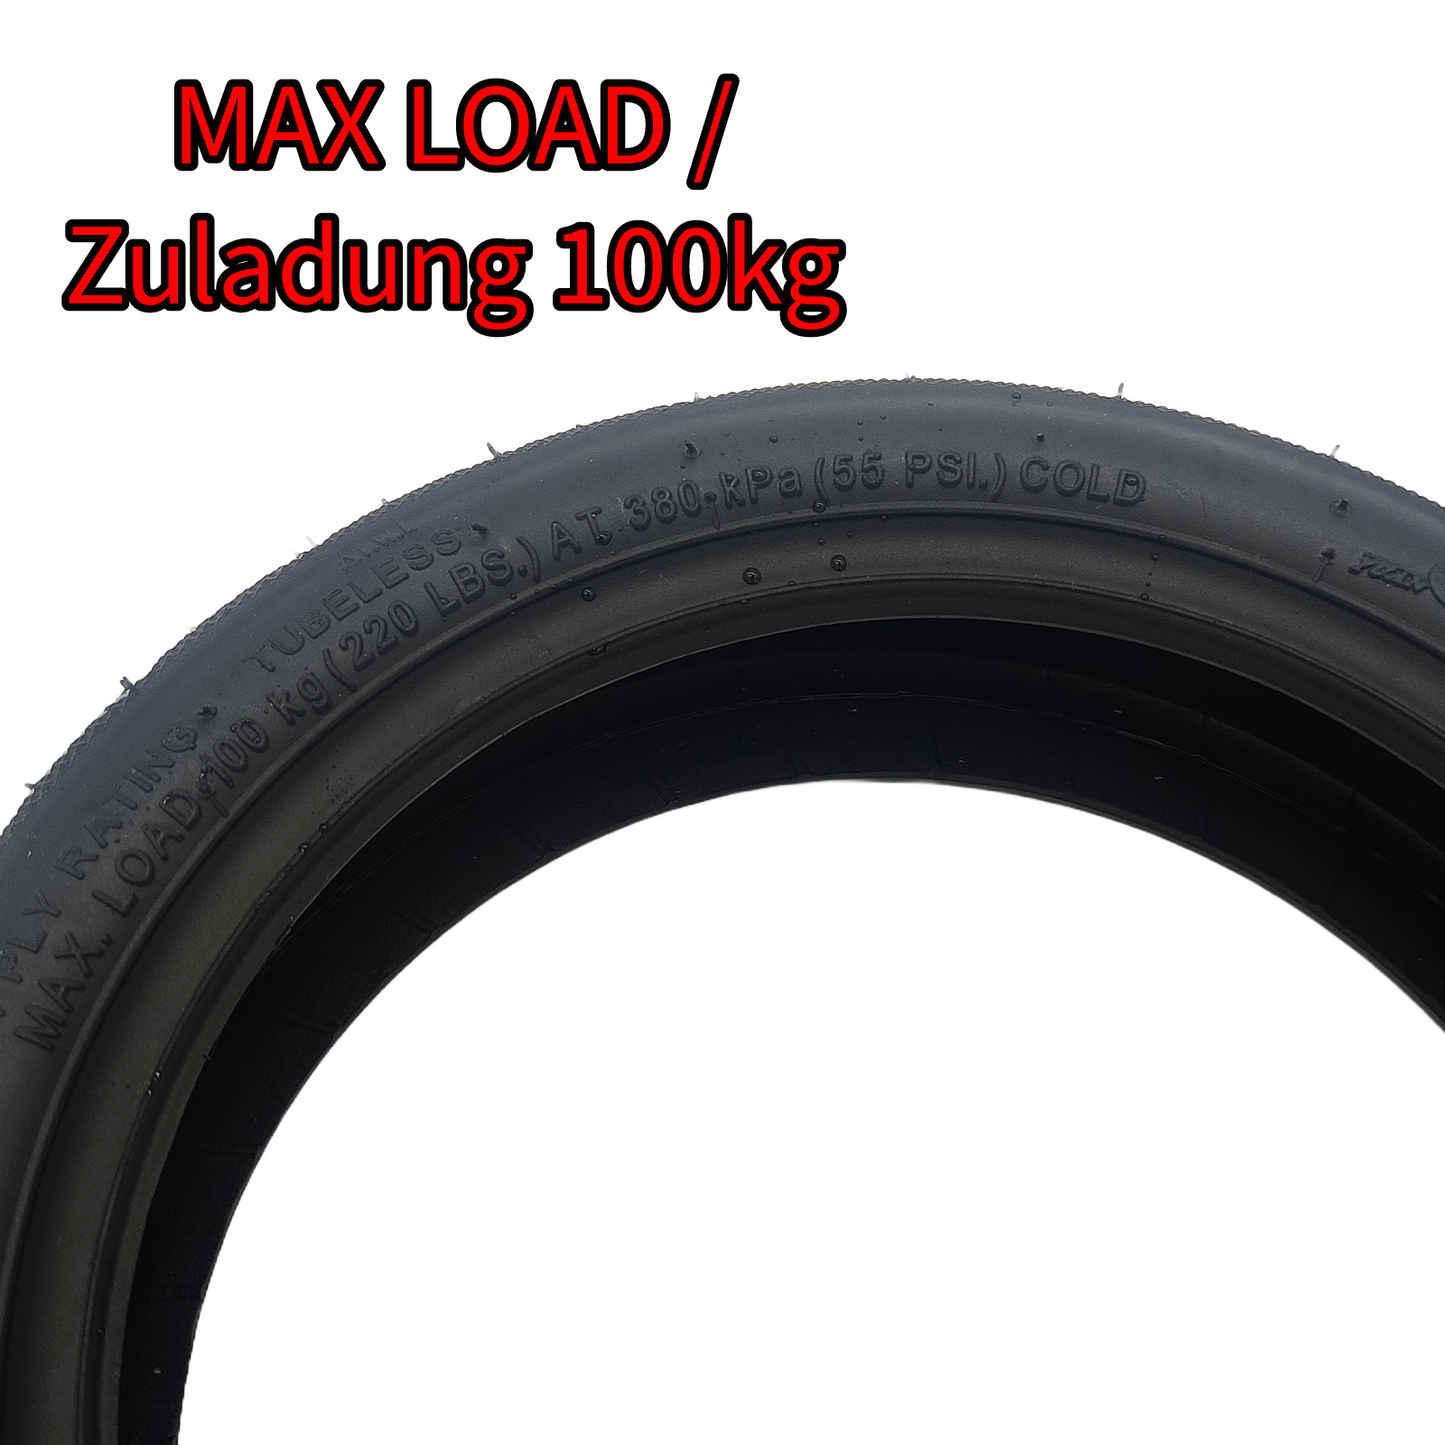 Ninebot Max G2 G2D tire rear wheel 60/65-6.9 tubeless with gel layer